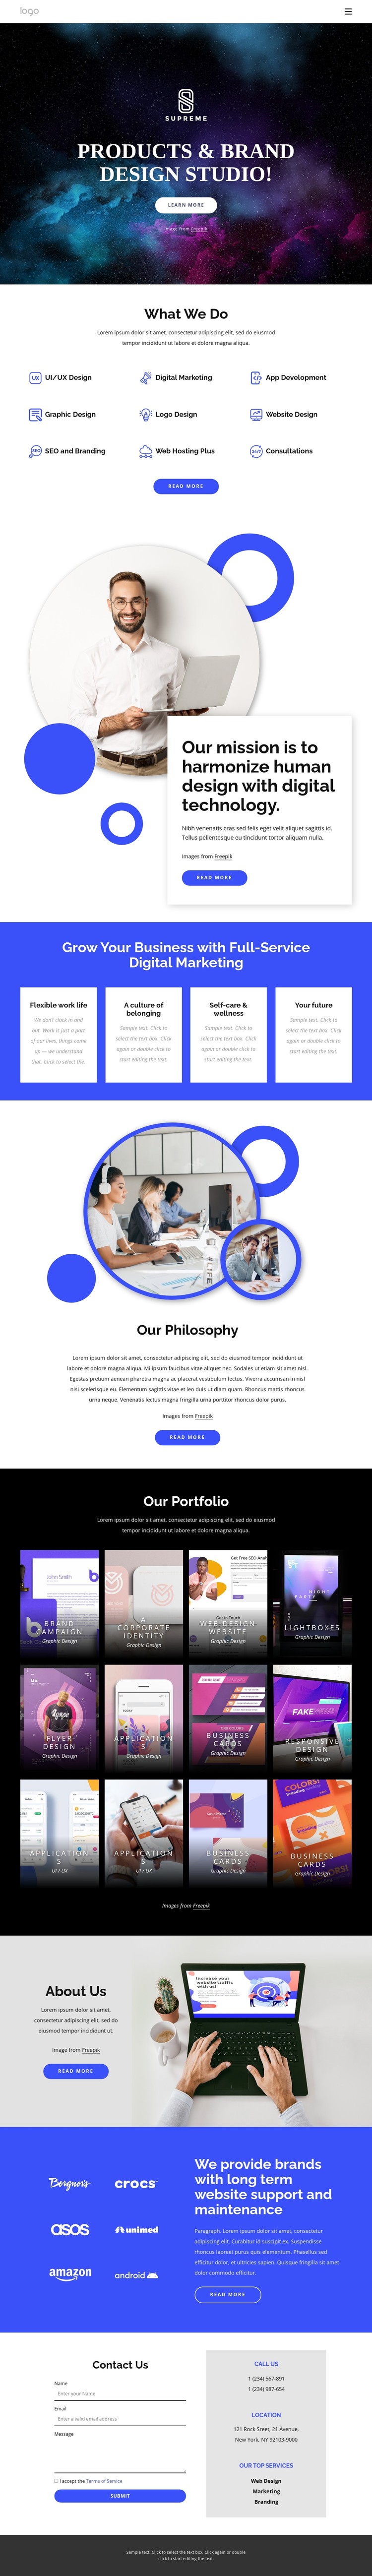 Products and brand design studio CSS Template